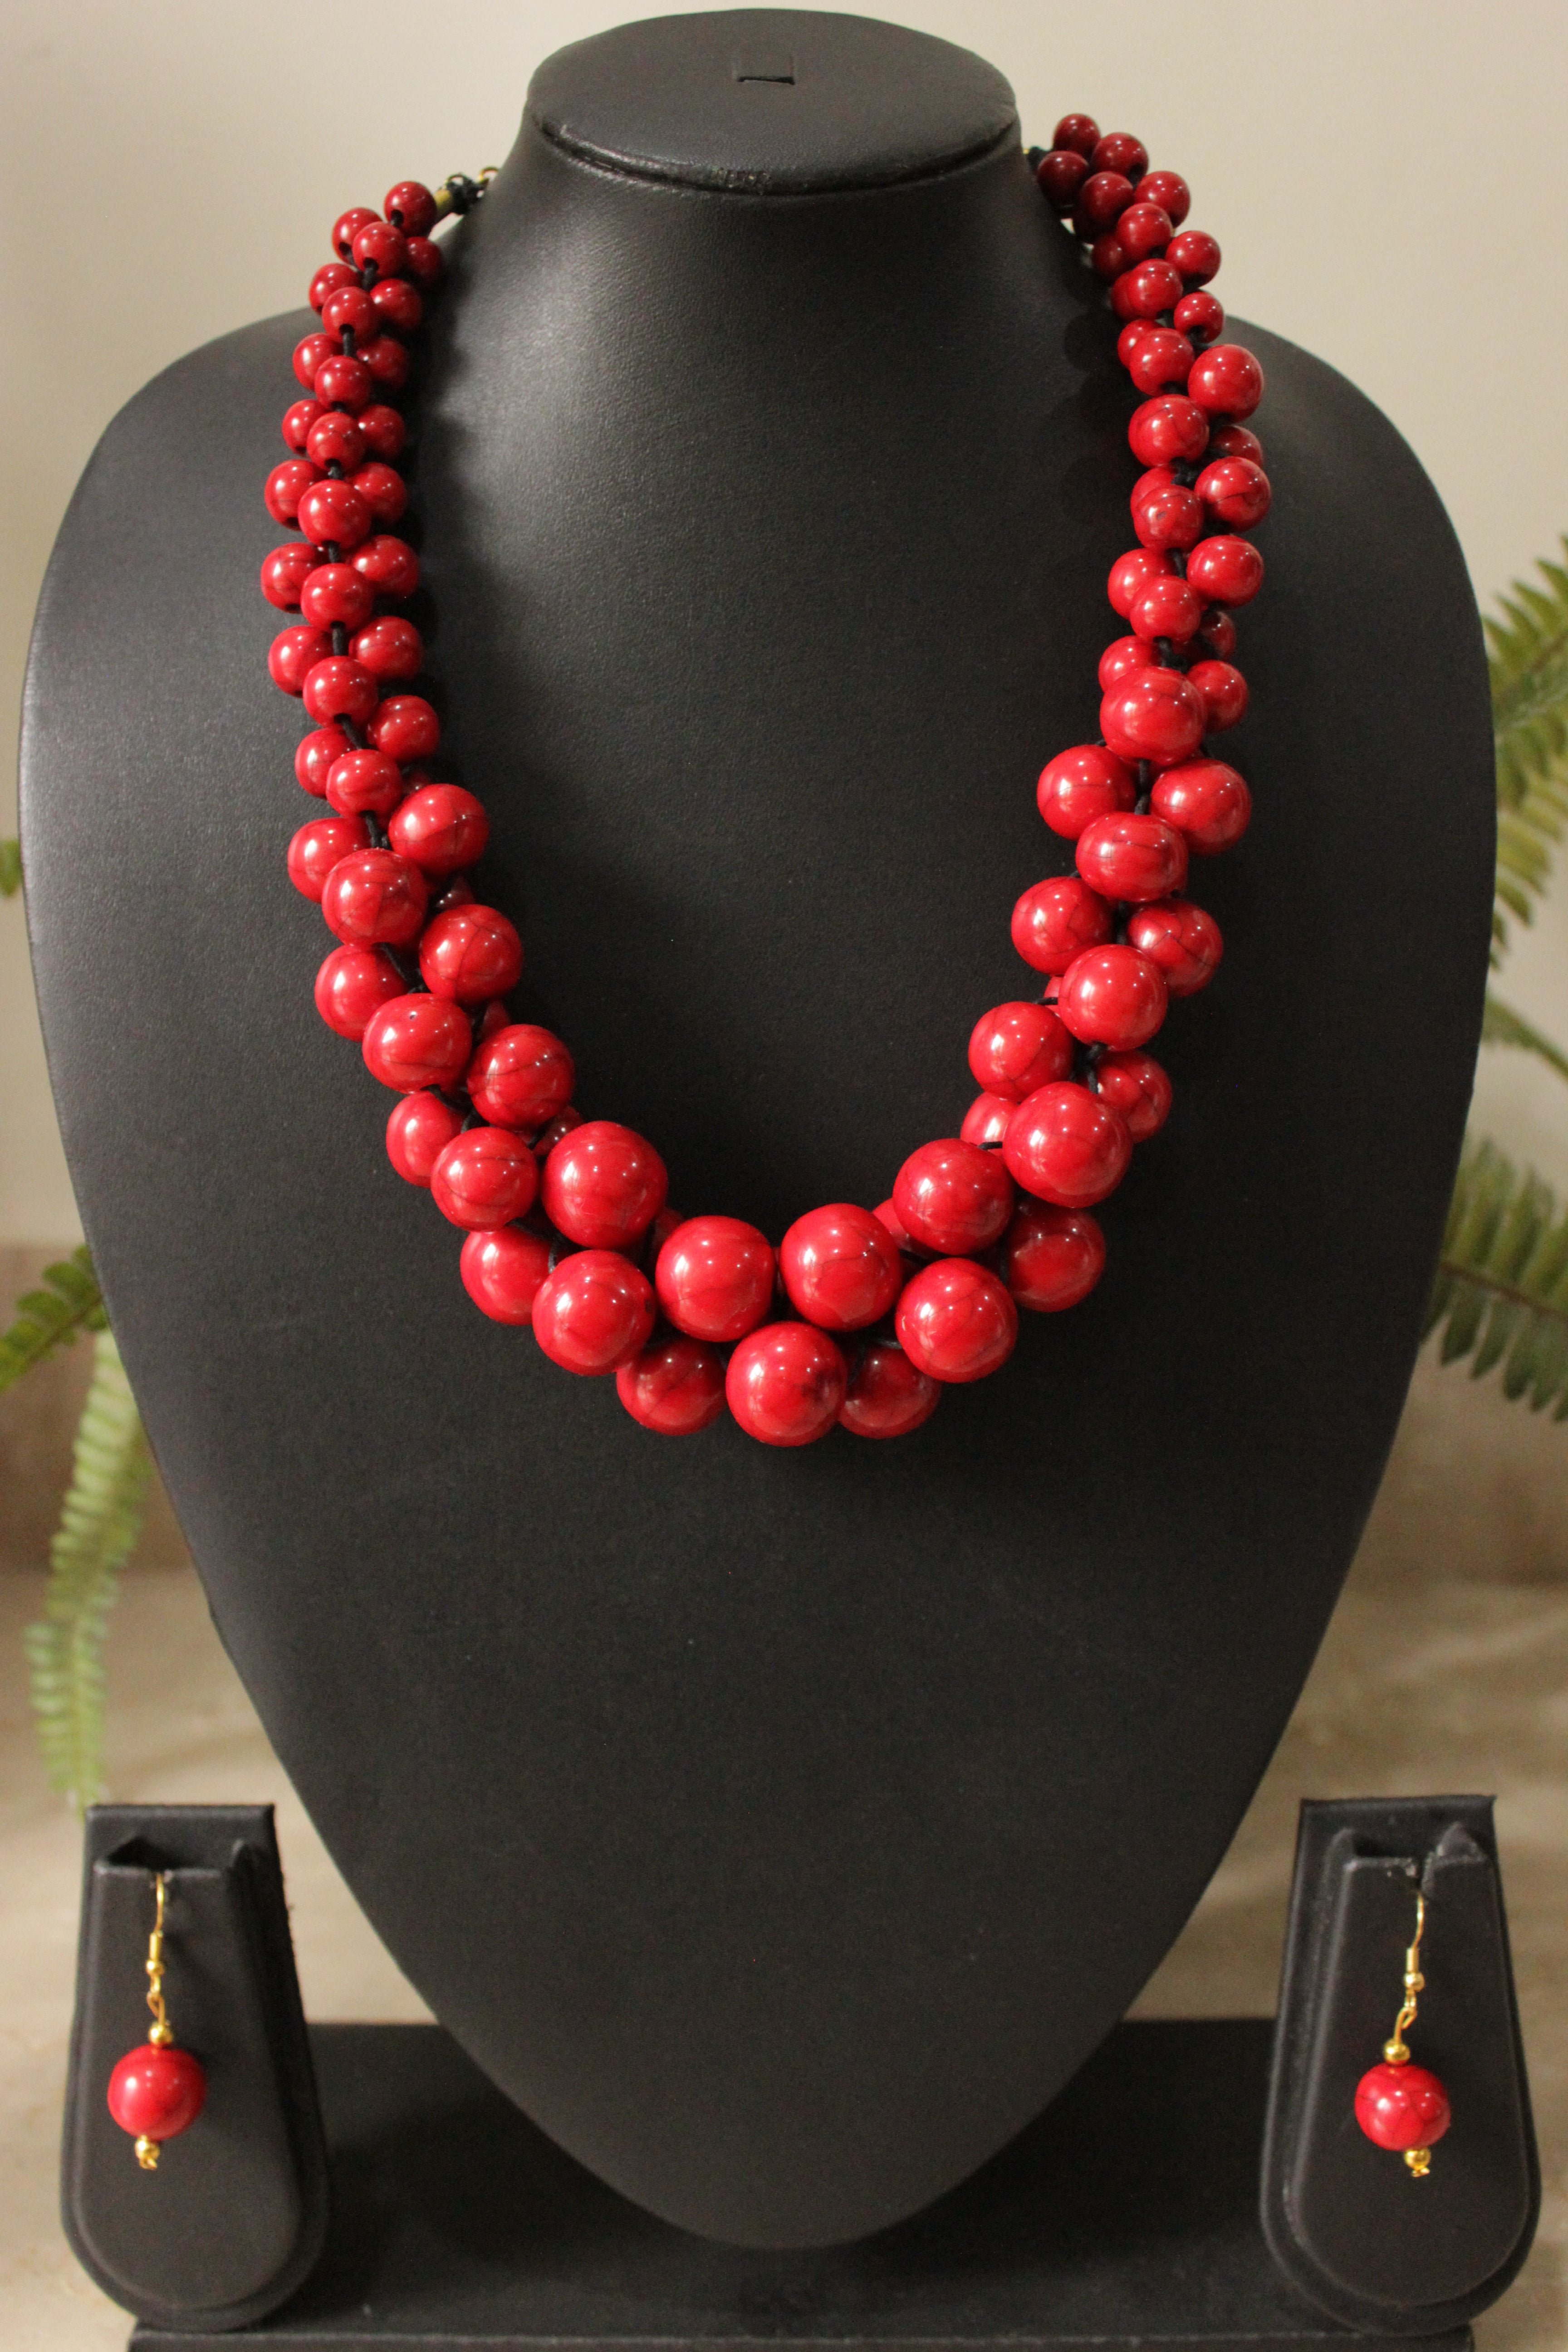 Red Acrylic Beads Tightly Braided in Fabric Thread Chain Closure Necklace